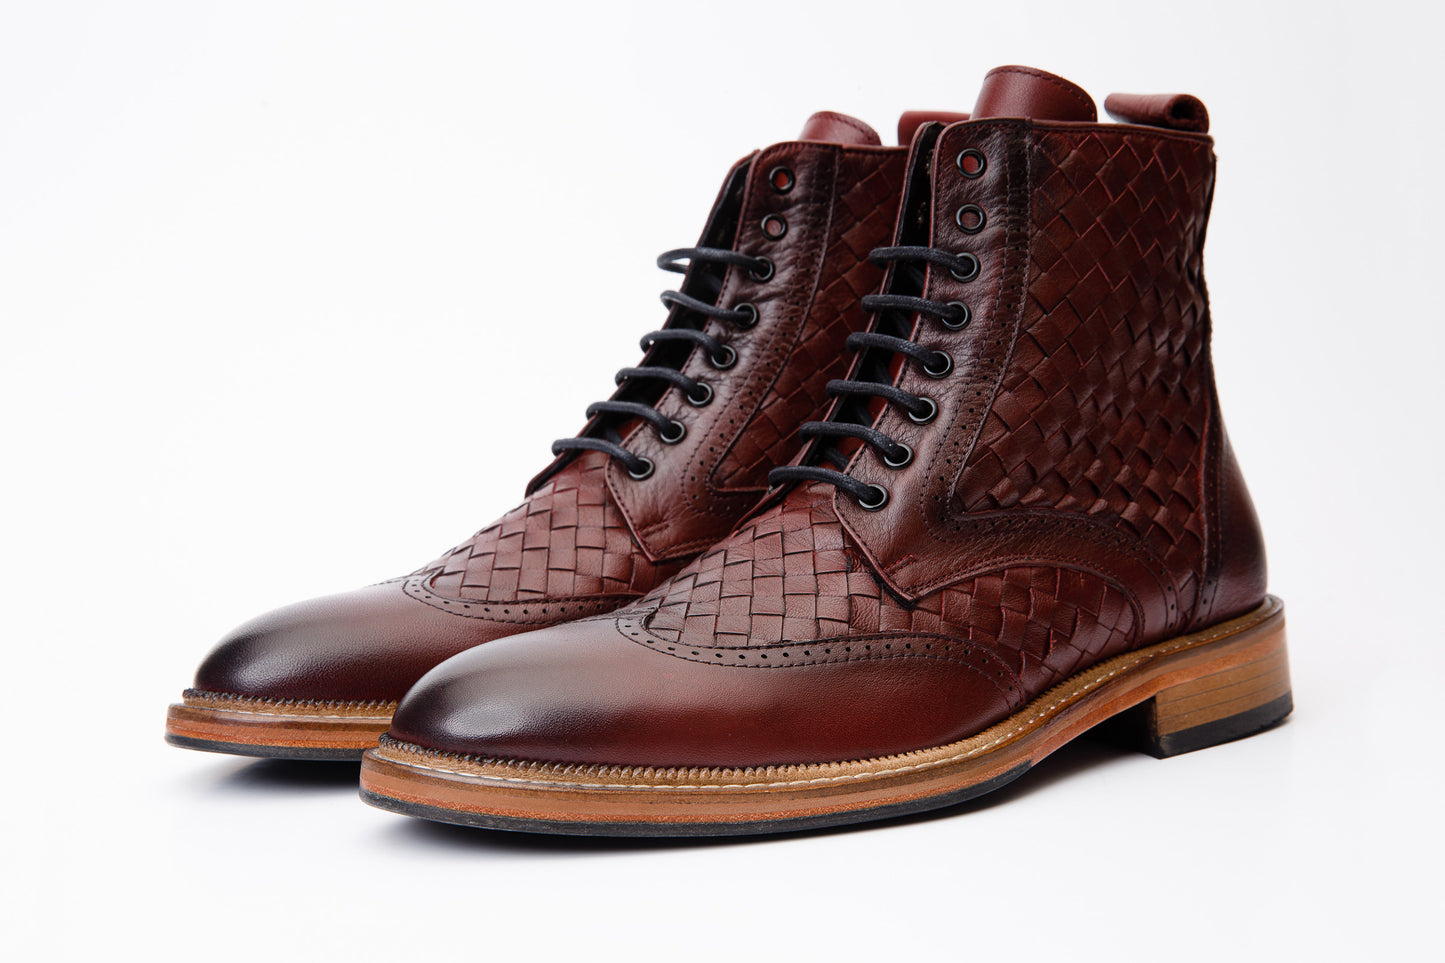 The Loddon Burgundy Leather Wingtip Brogue Handwoven Lace-Up Men Boot with a Zipper